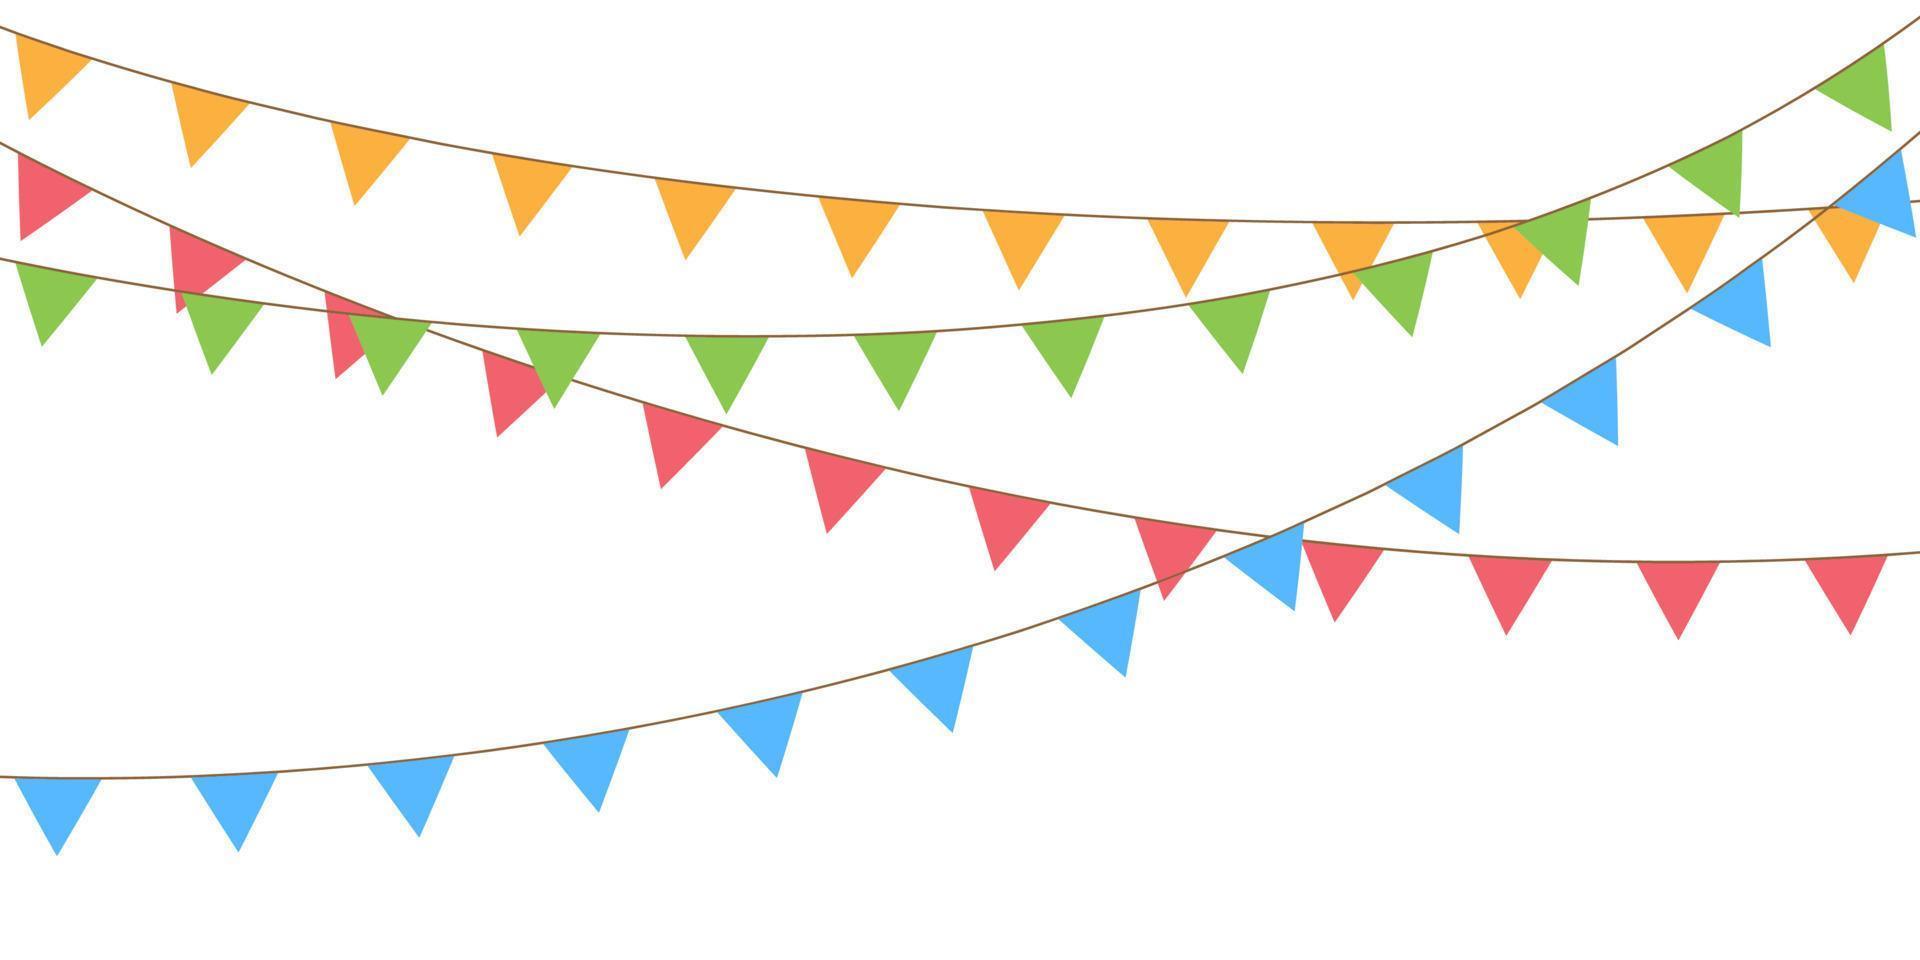 Blank banner, bunting or swag templates for scrapbooking parties, spring, Easter, baby showers and sales, on transparent background, in vector format